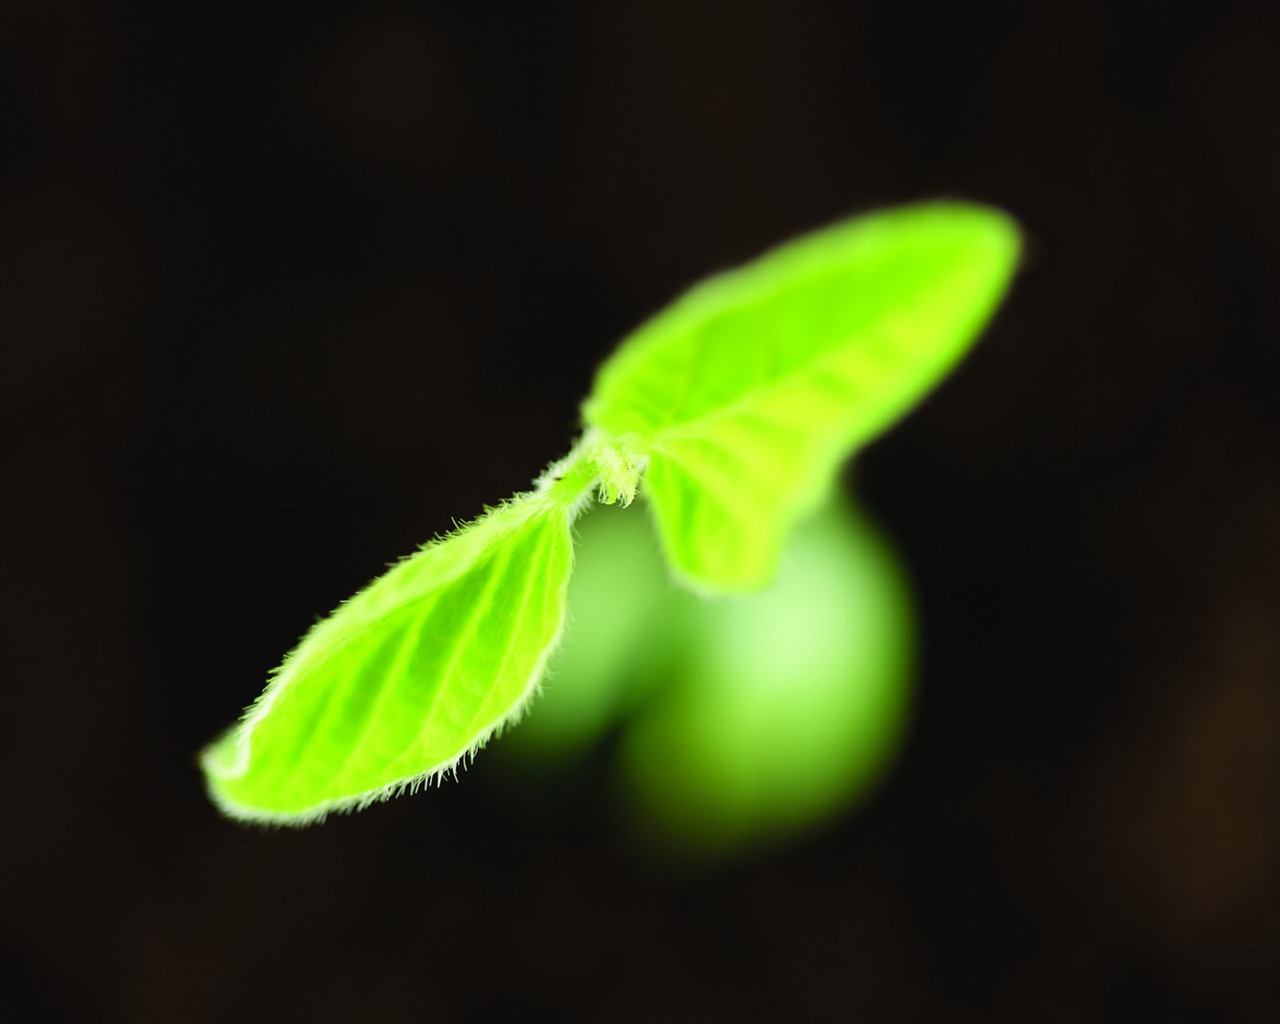 Green seedlings just sprouting HD wallpapers #5 - 1280x1024